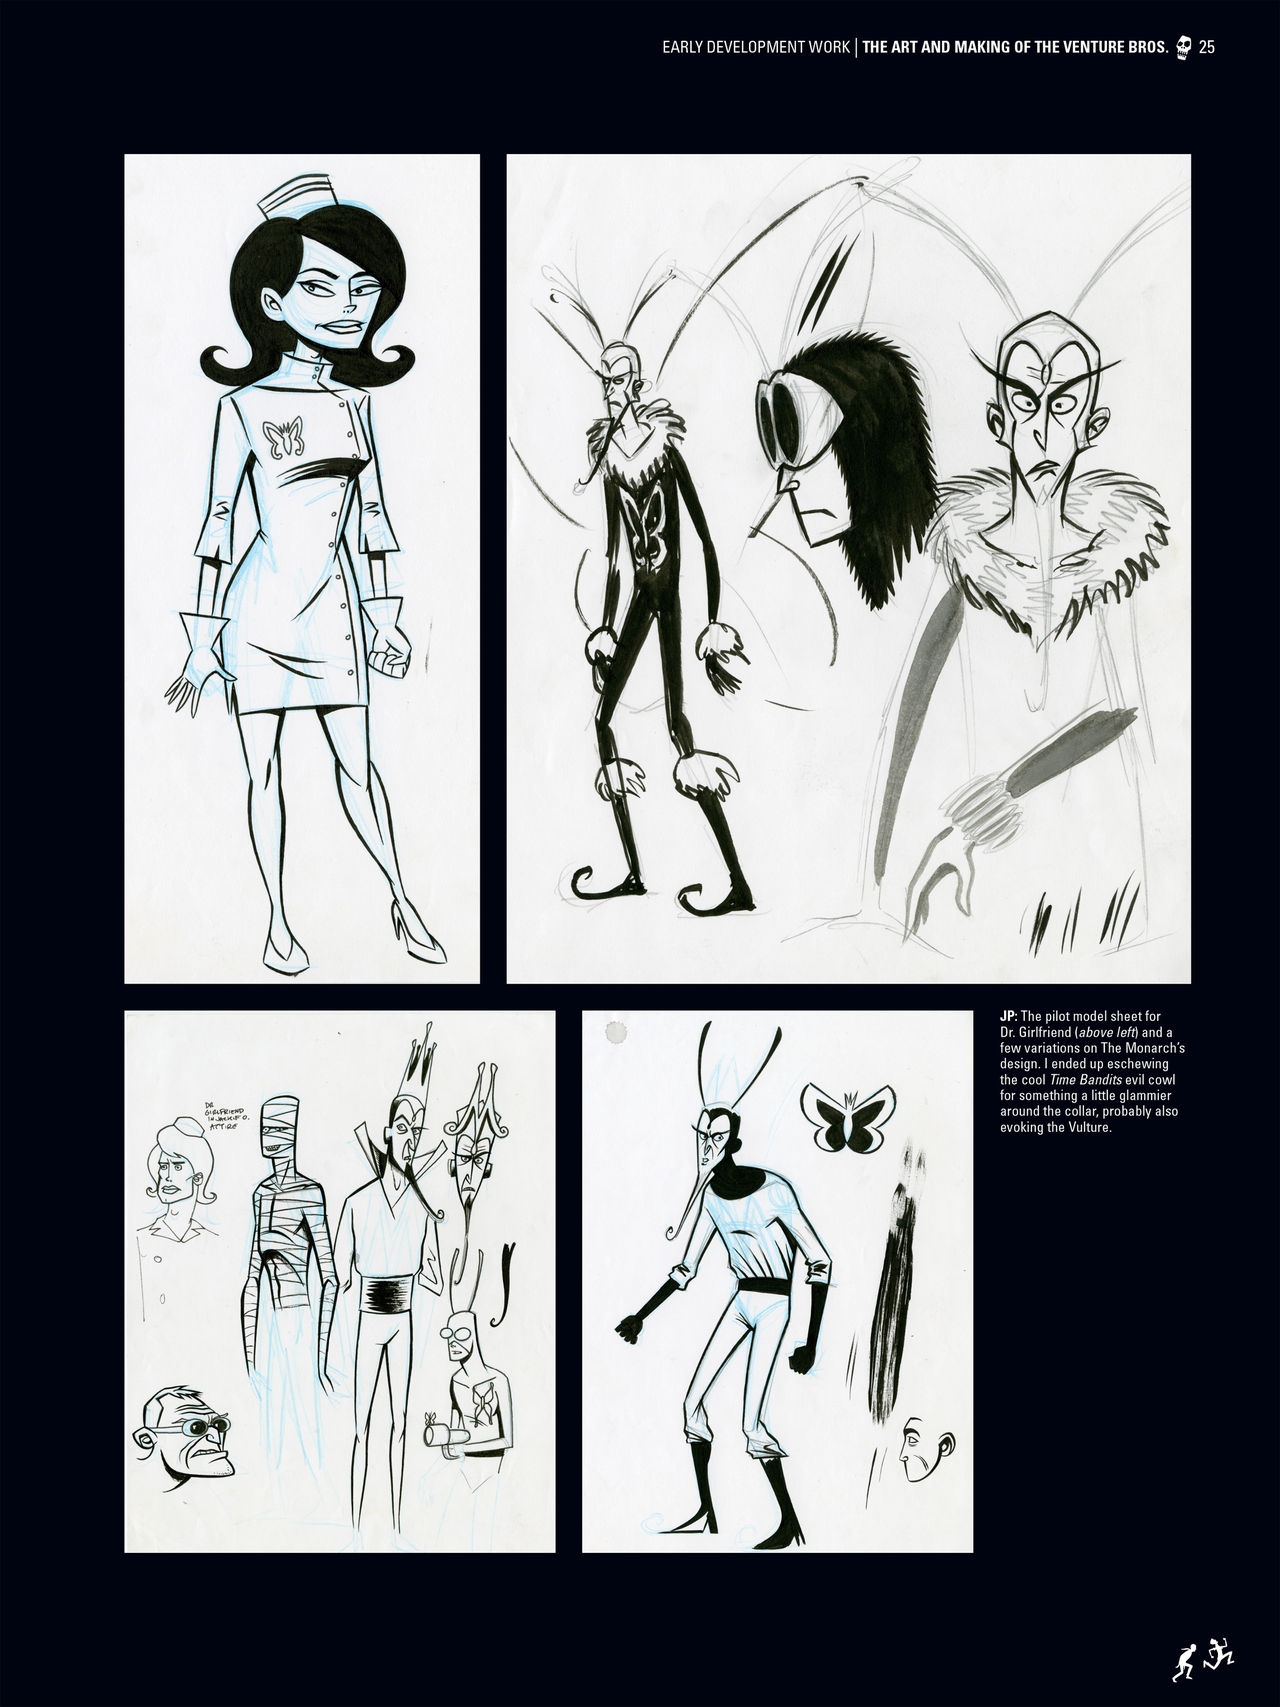 Go Team Venture! - The Art and Making of the Venture Bros 24